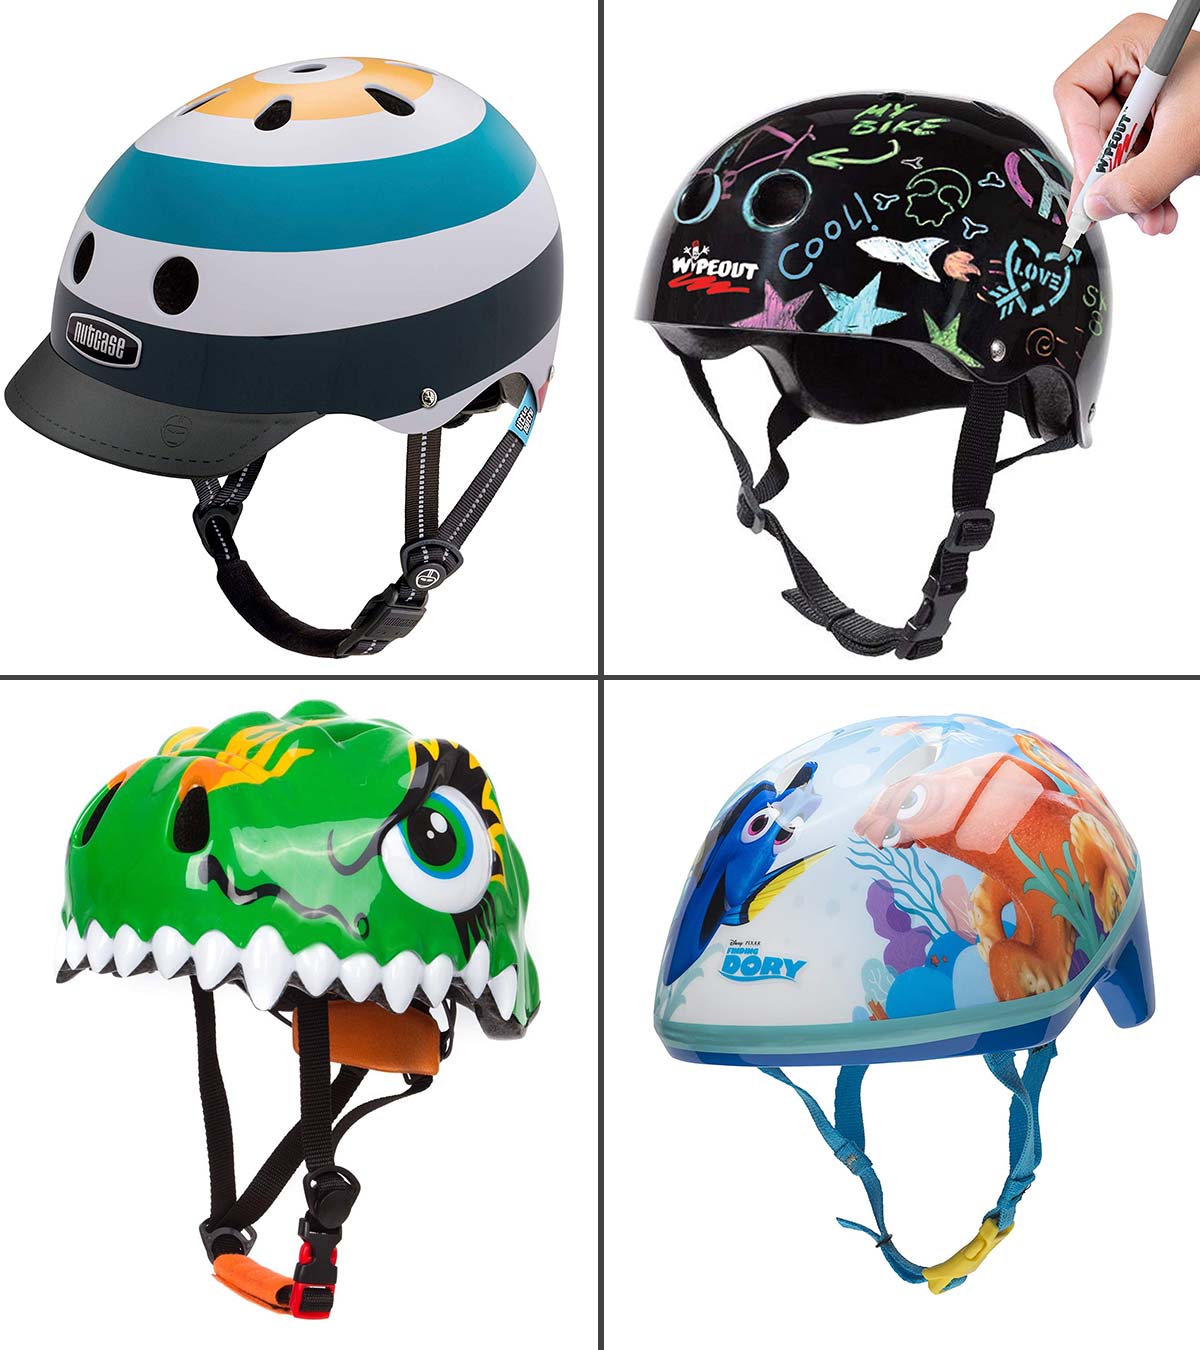 dot approved helmet for 2 year old